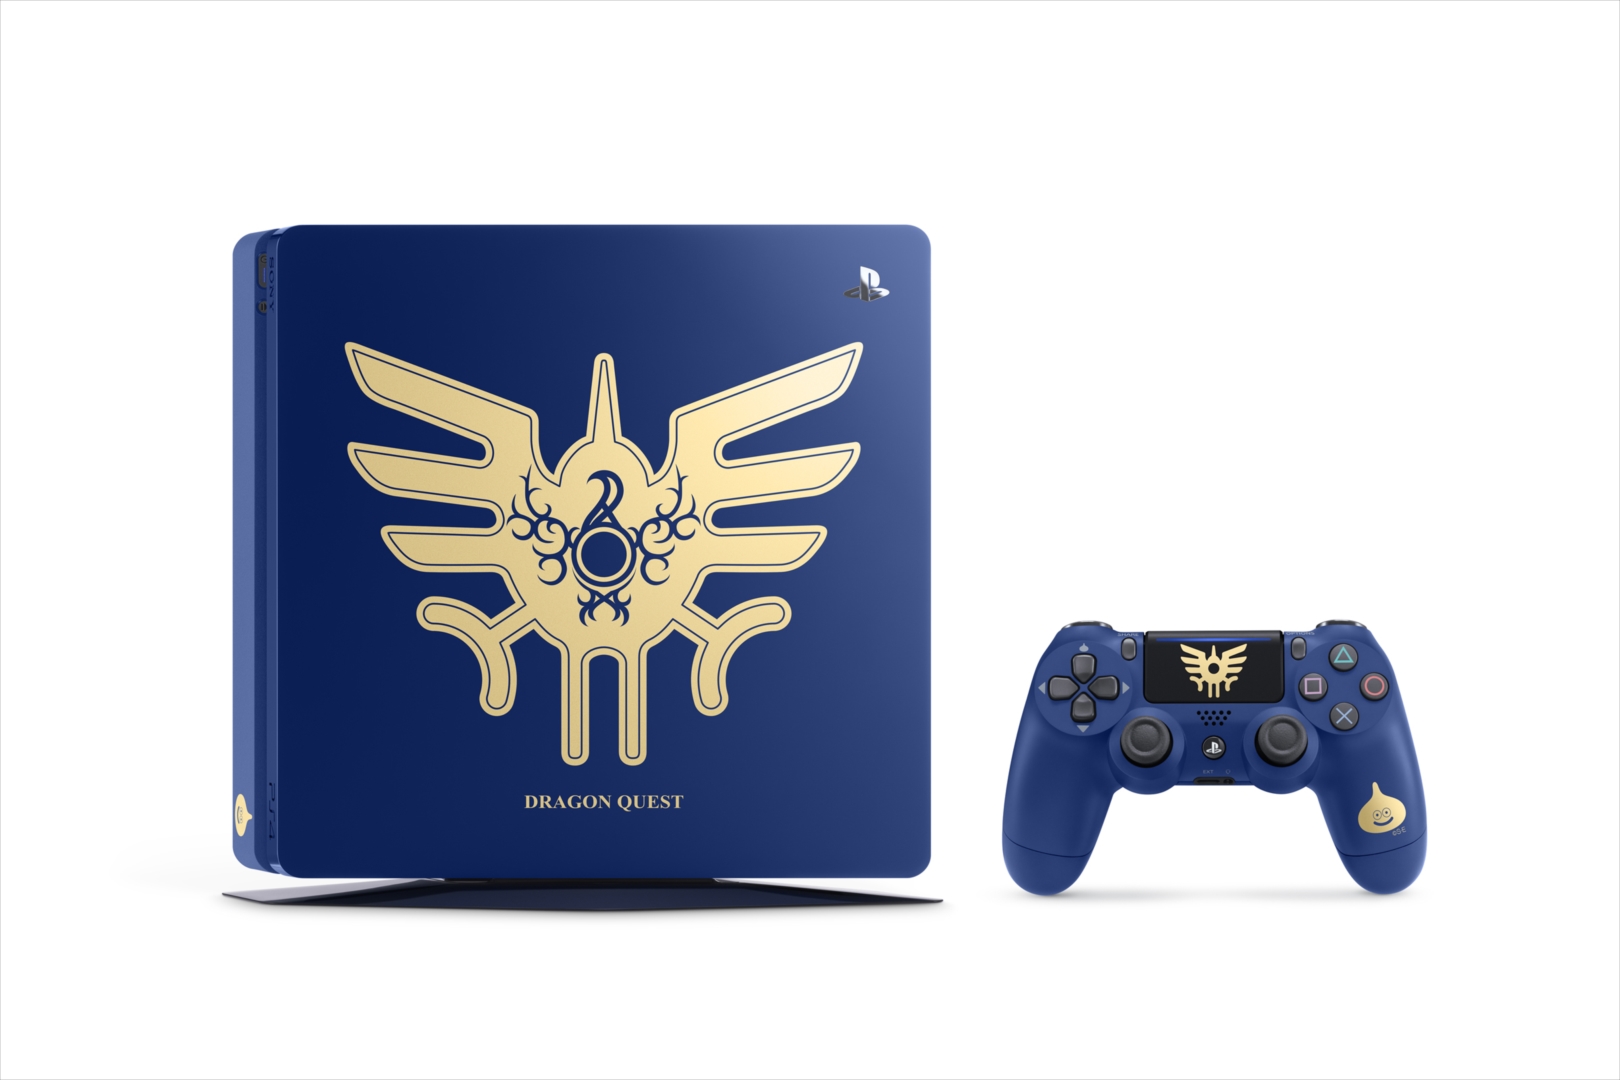 Sony Is Not Messing Around With This Dragon Quest 11 PS4